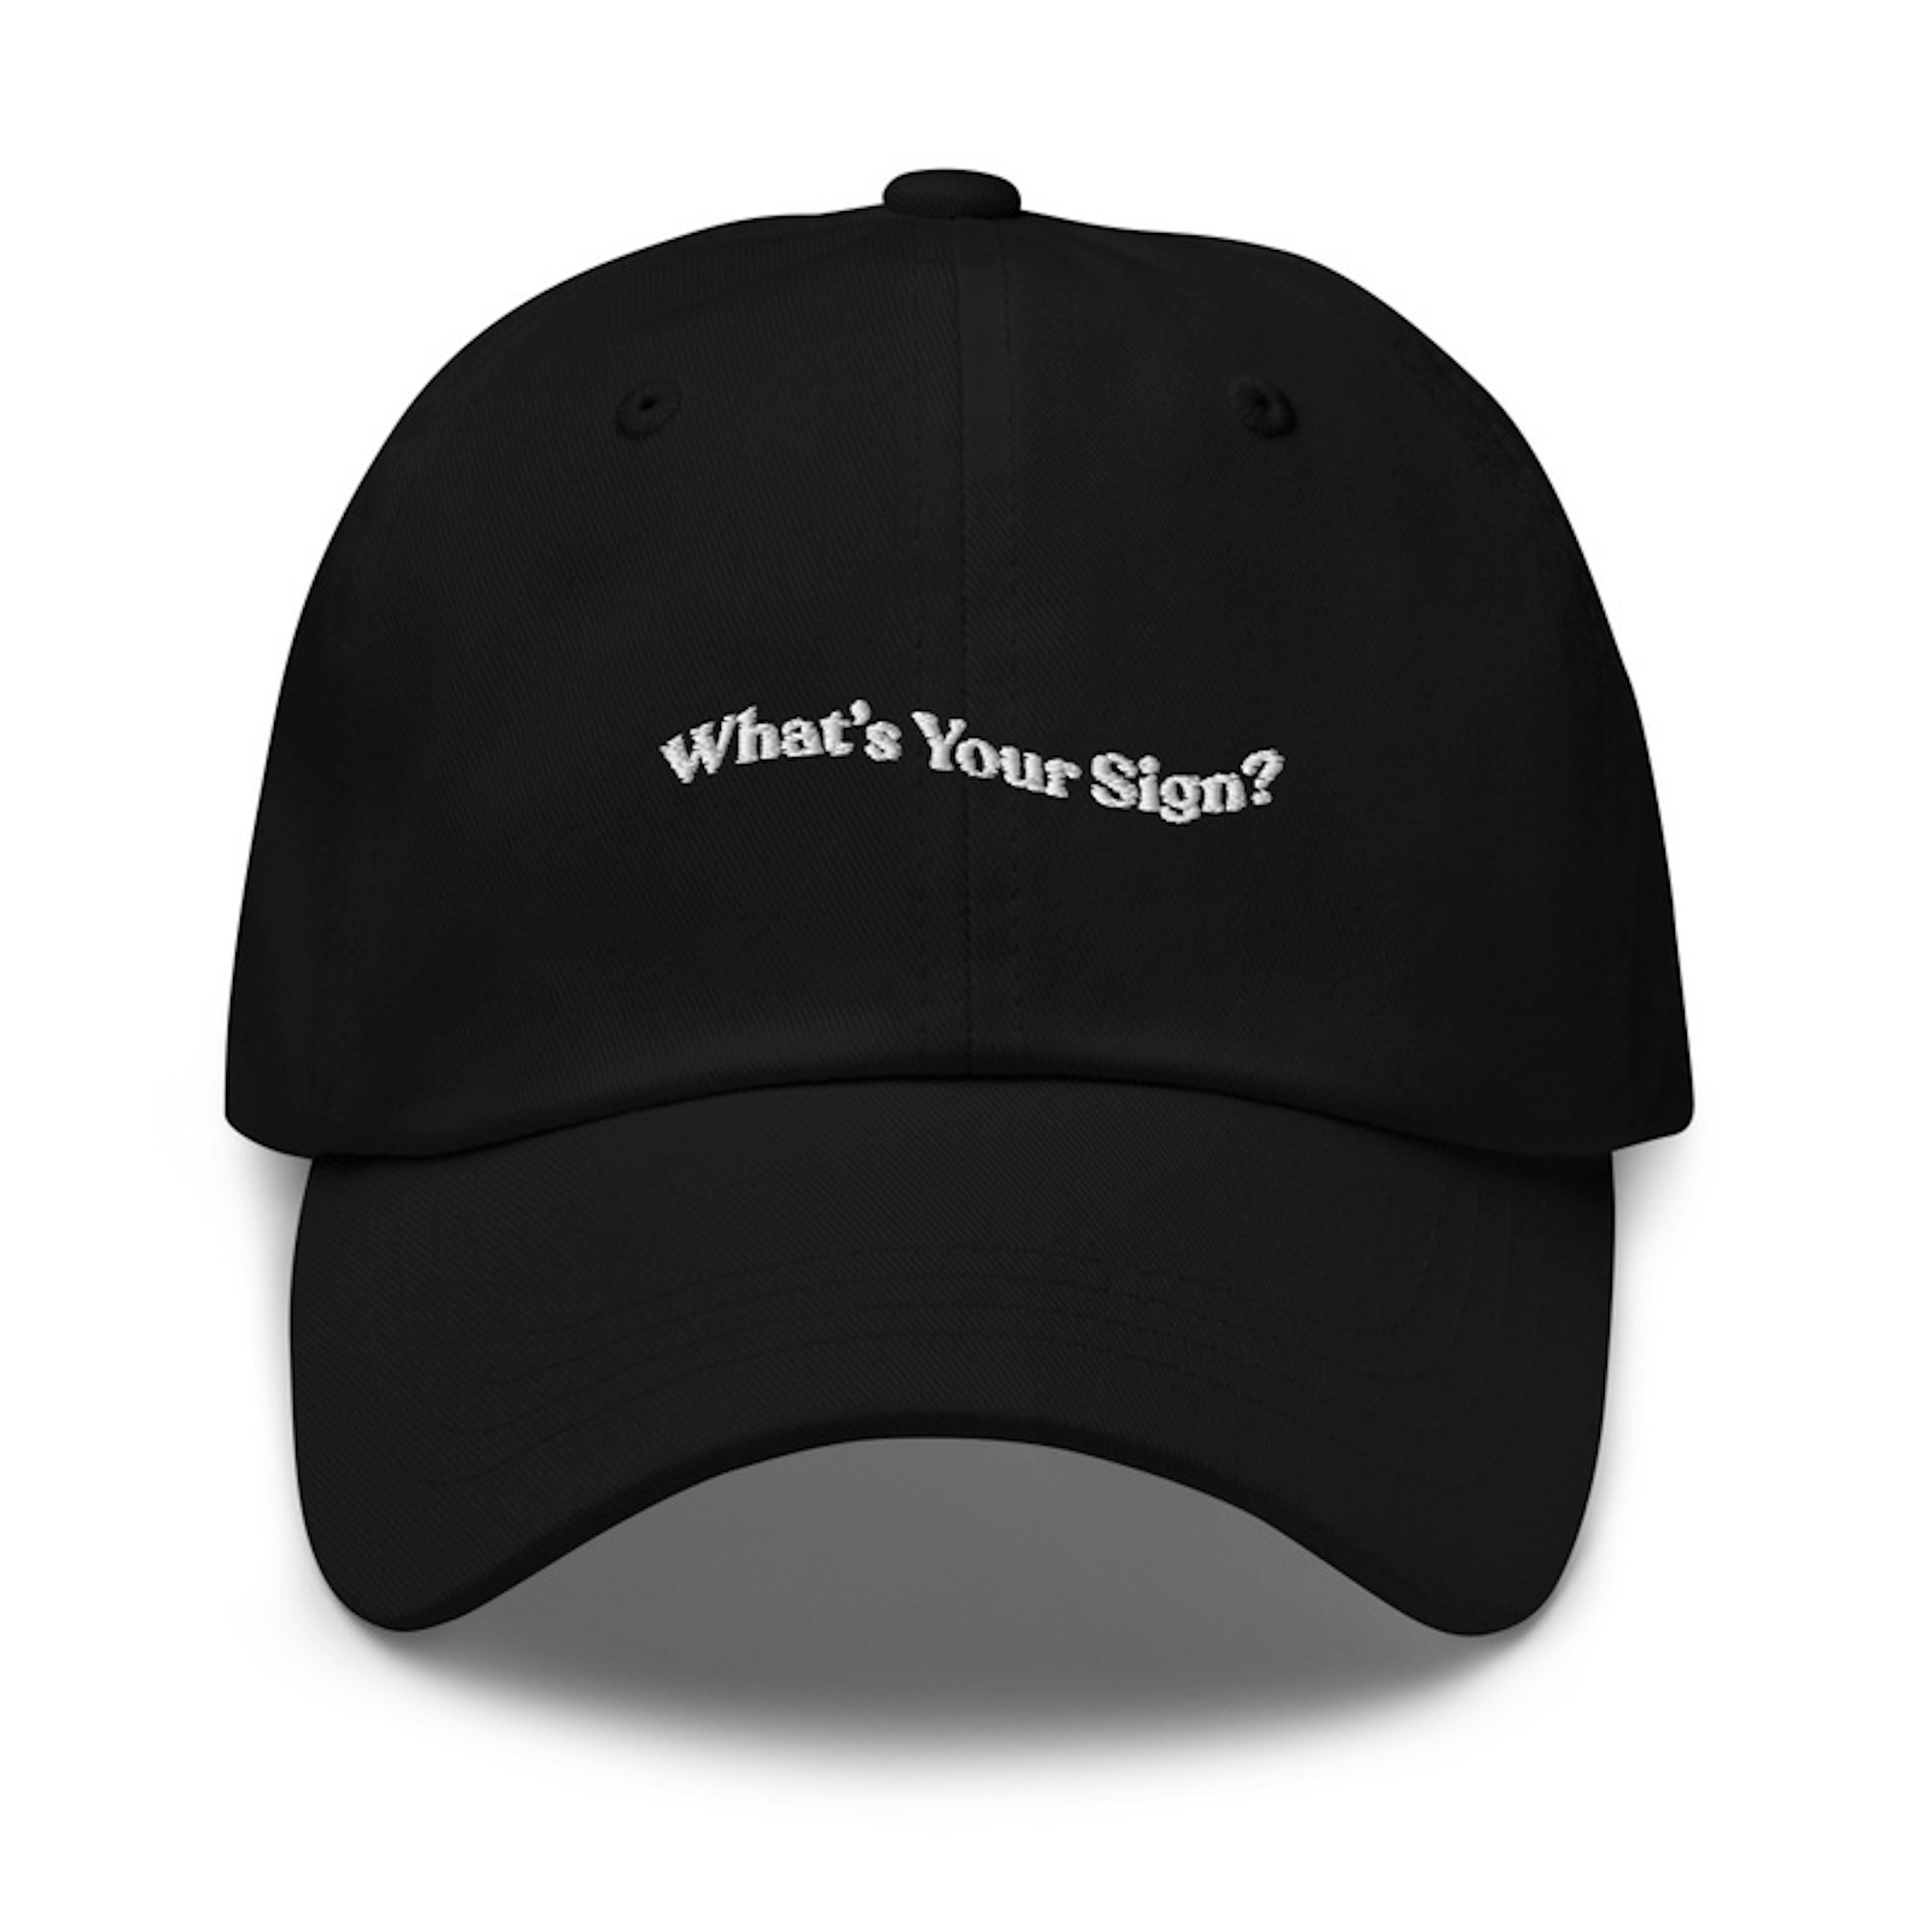 What's Your Sign? Dad Hat